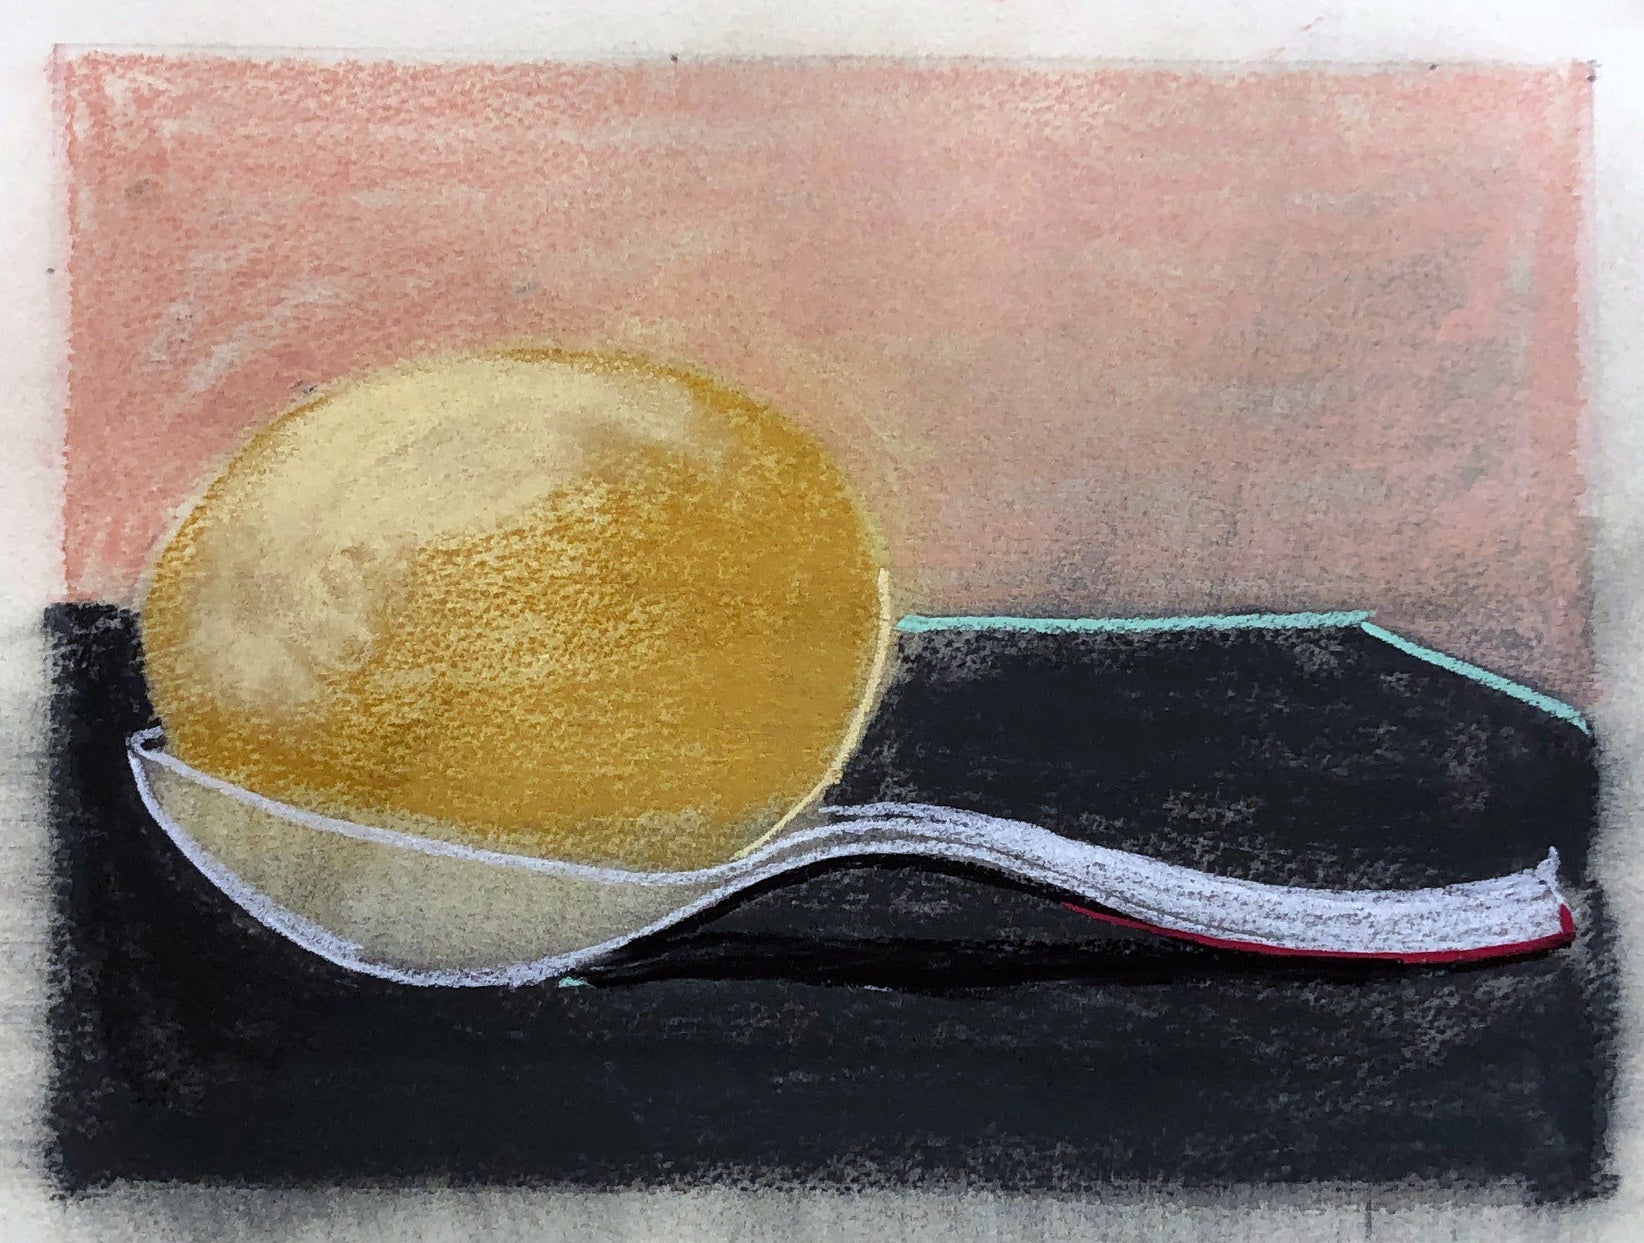 Peter Ashton Jones 'The Egg and Spoon', 2021 Pastel, conte, charcoal on paper 21x30cm